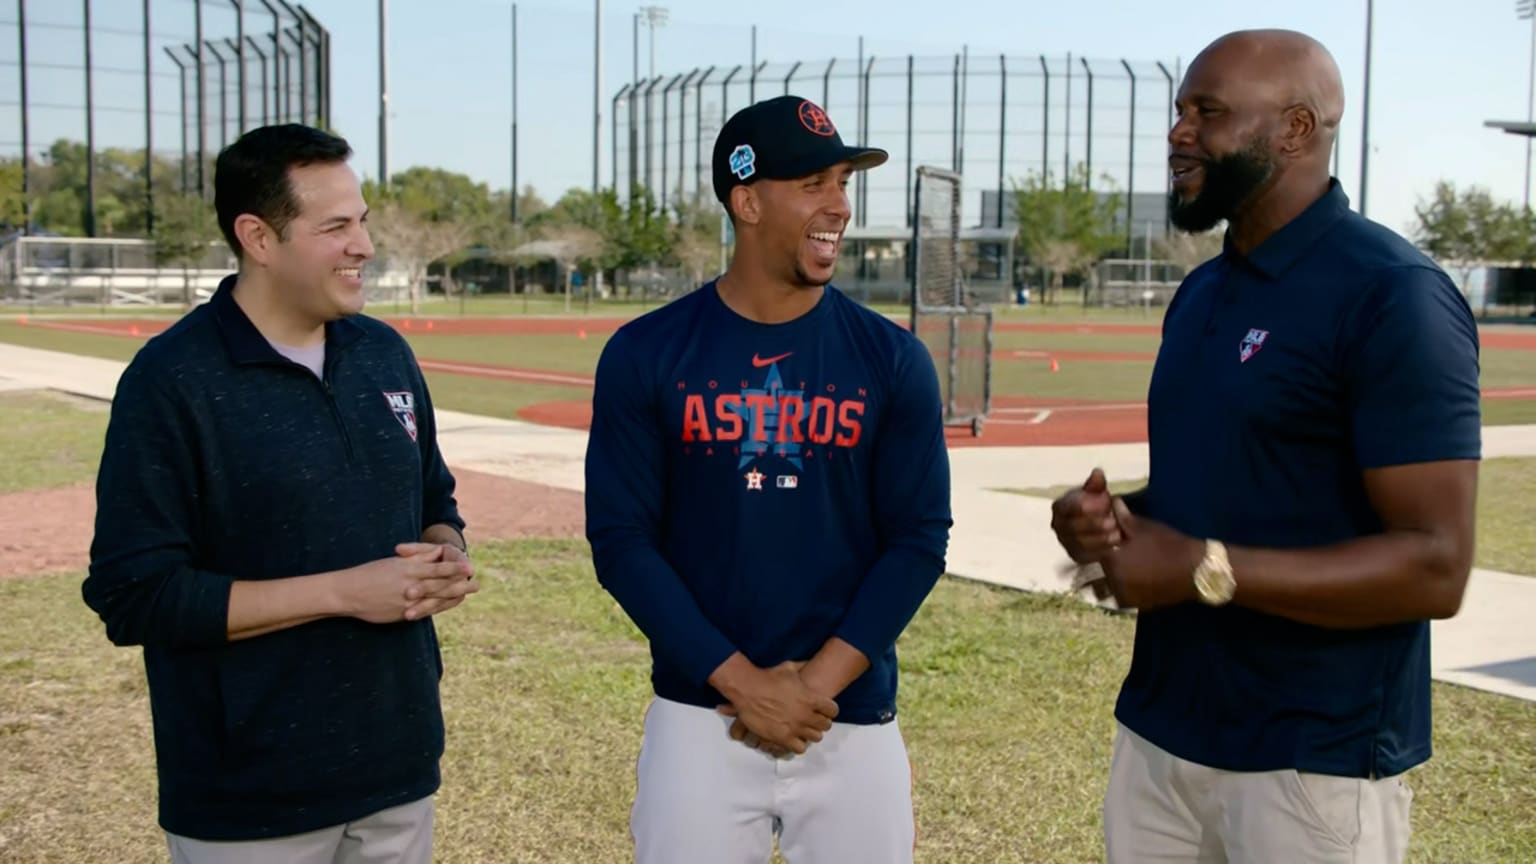 Behind The Scenes of Michael Brantley 1st Baseman Workouts at Houston Astros  Spring Training 